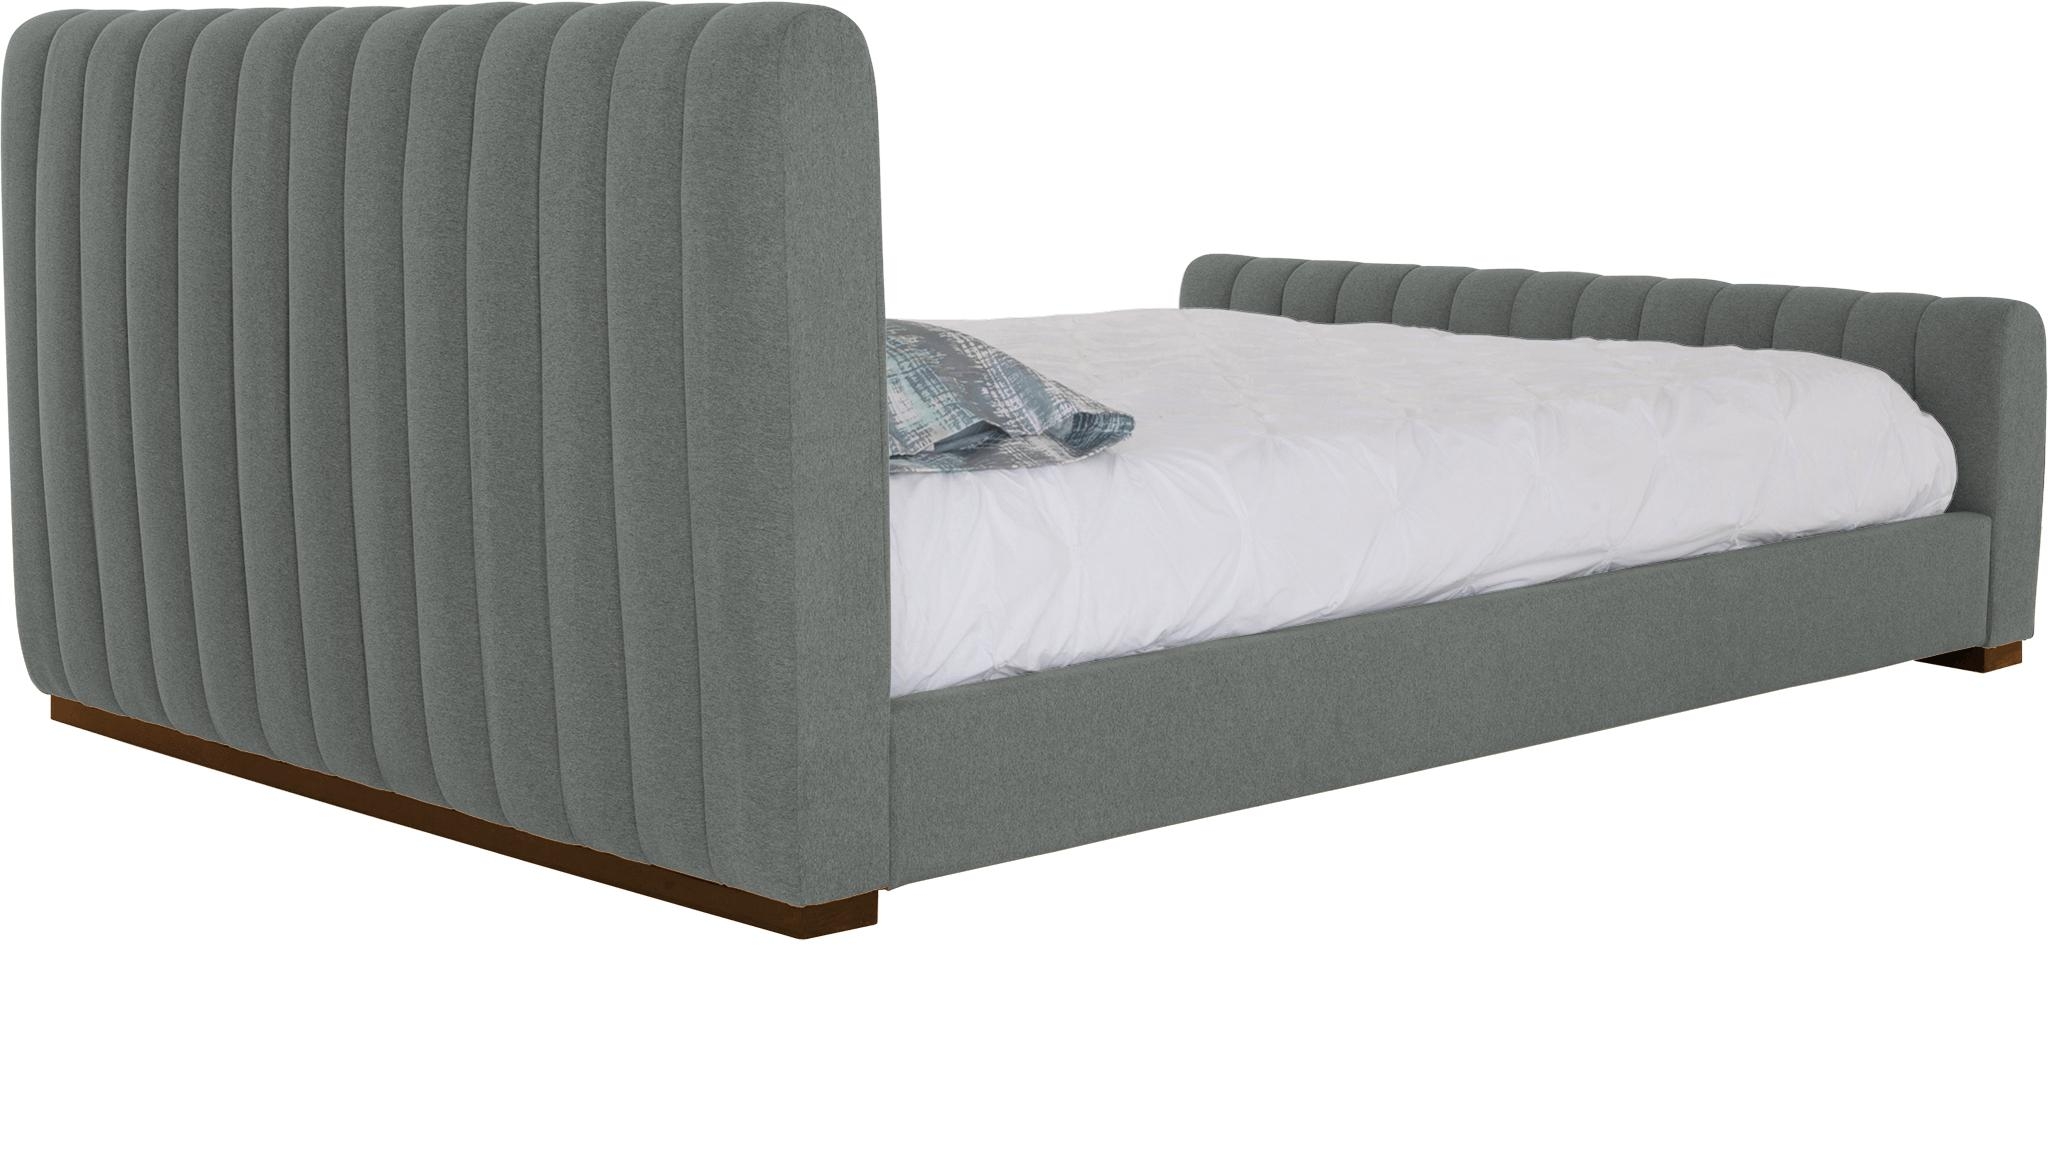 Gray Camille Mid Century Modern Bed - Essence Ash - Mocha - Eastern King - Image 3